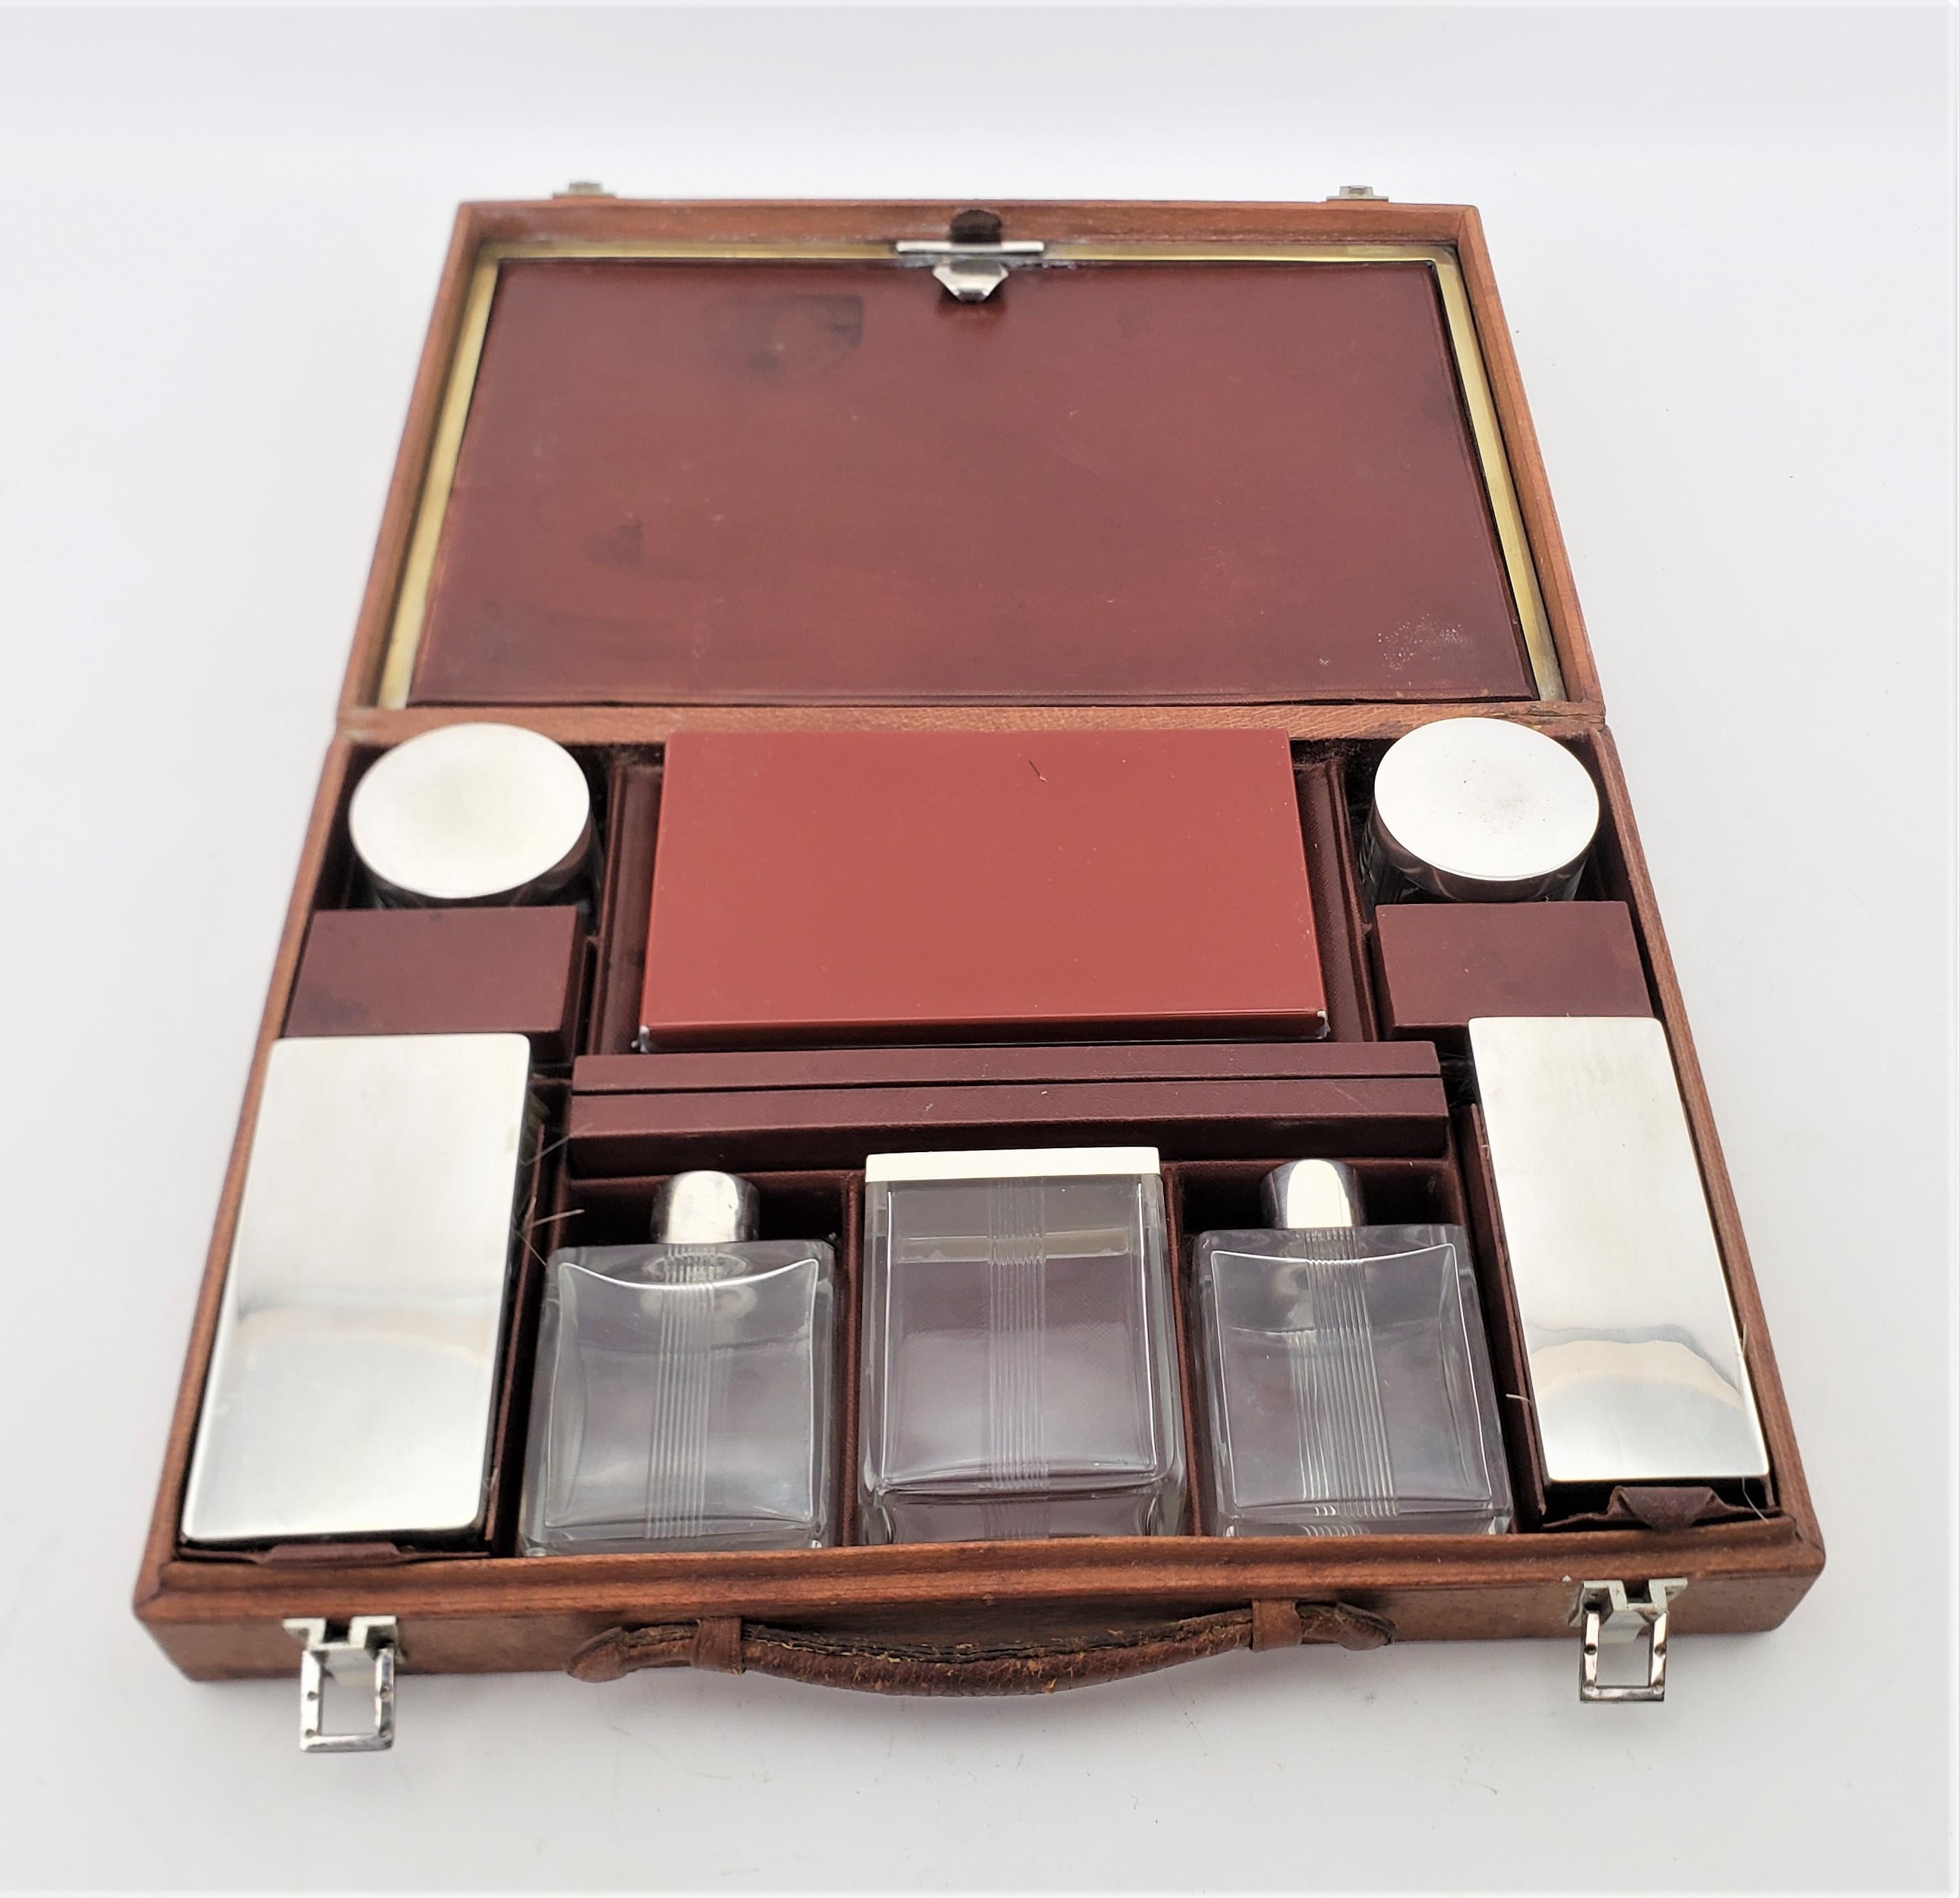 This travelling dresser or vanity set is unsigned, but presumed to have originated from France and date to approximately 1920 and done in the period Art Deco style. The set is composed of a series of leather covered boxes and two jars, two bottles